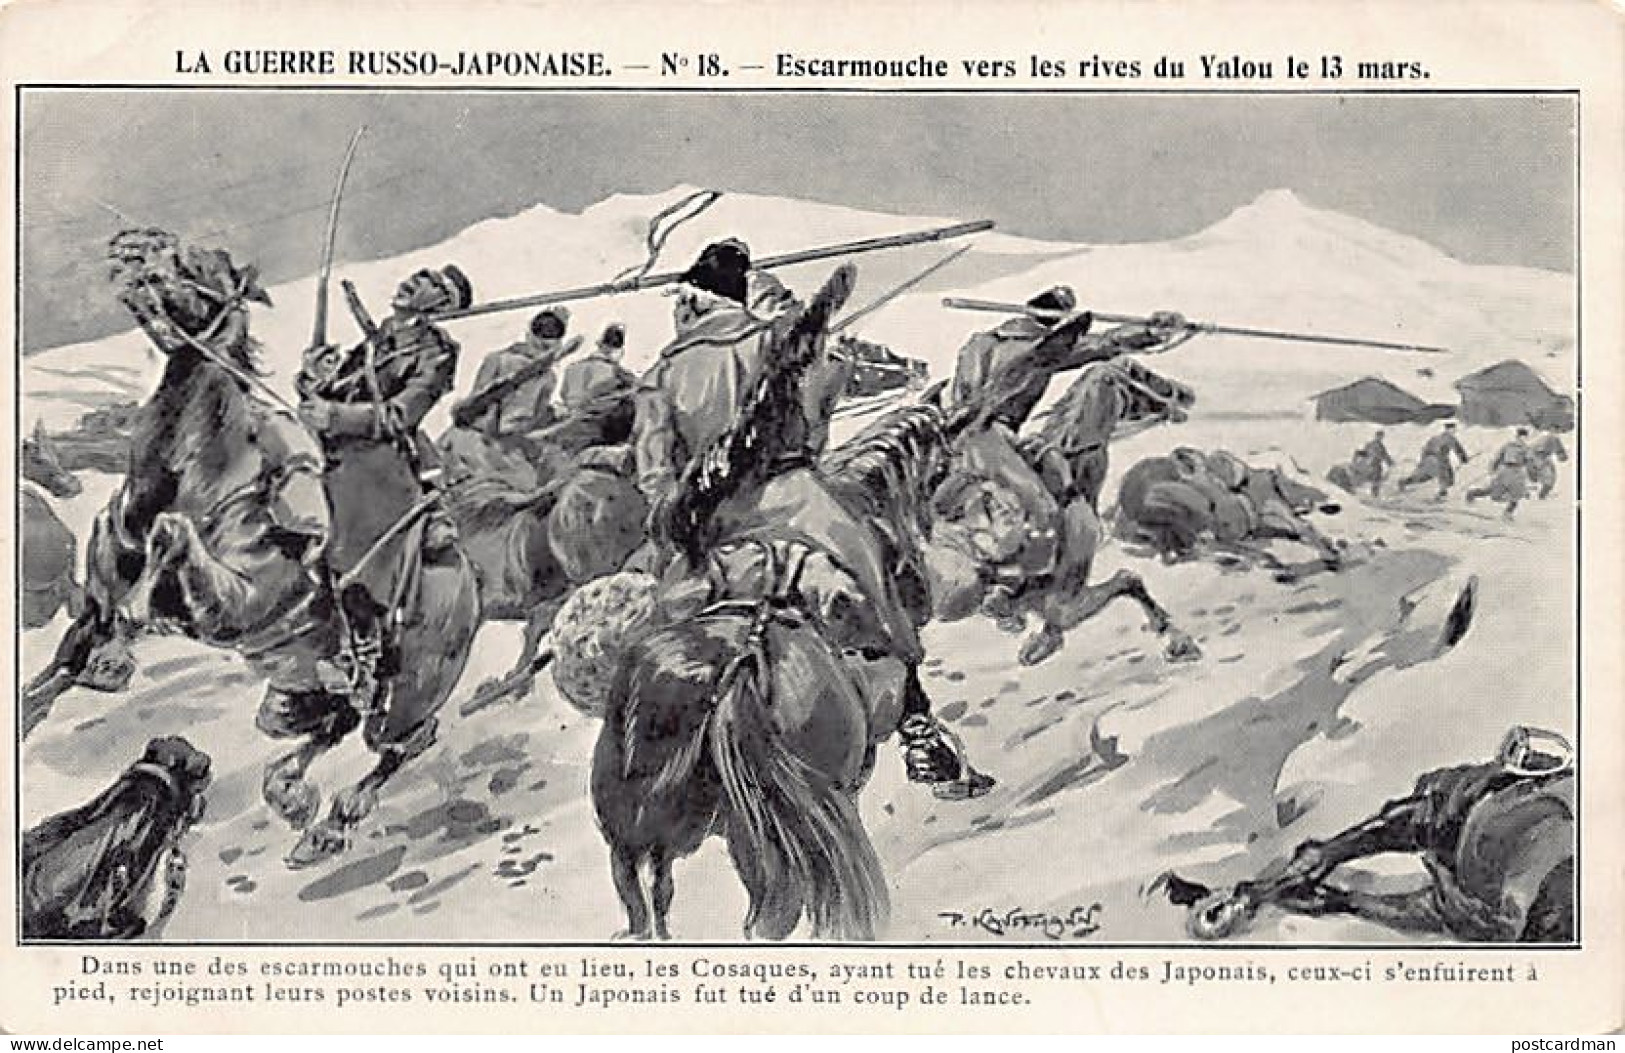 Korea - RUSSO JAPANESE WAR - Skirmishes Near The Banks Of The Yalu River On March 13, 1904 - Corea Del Nord